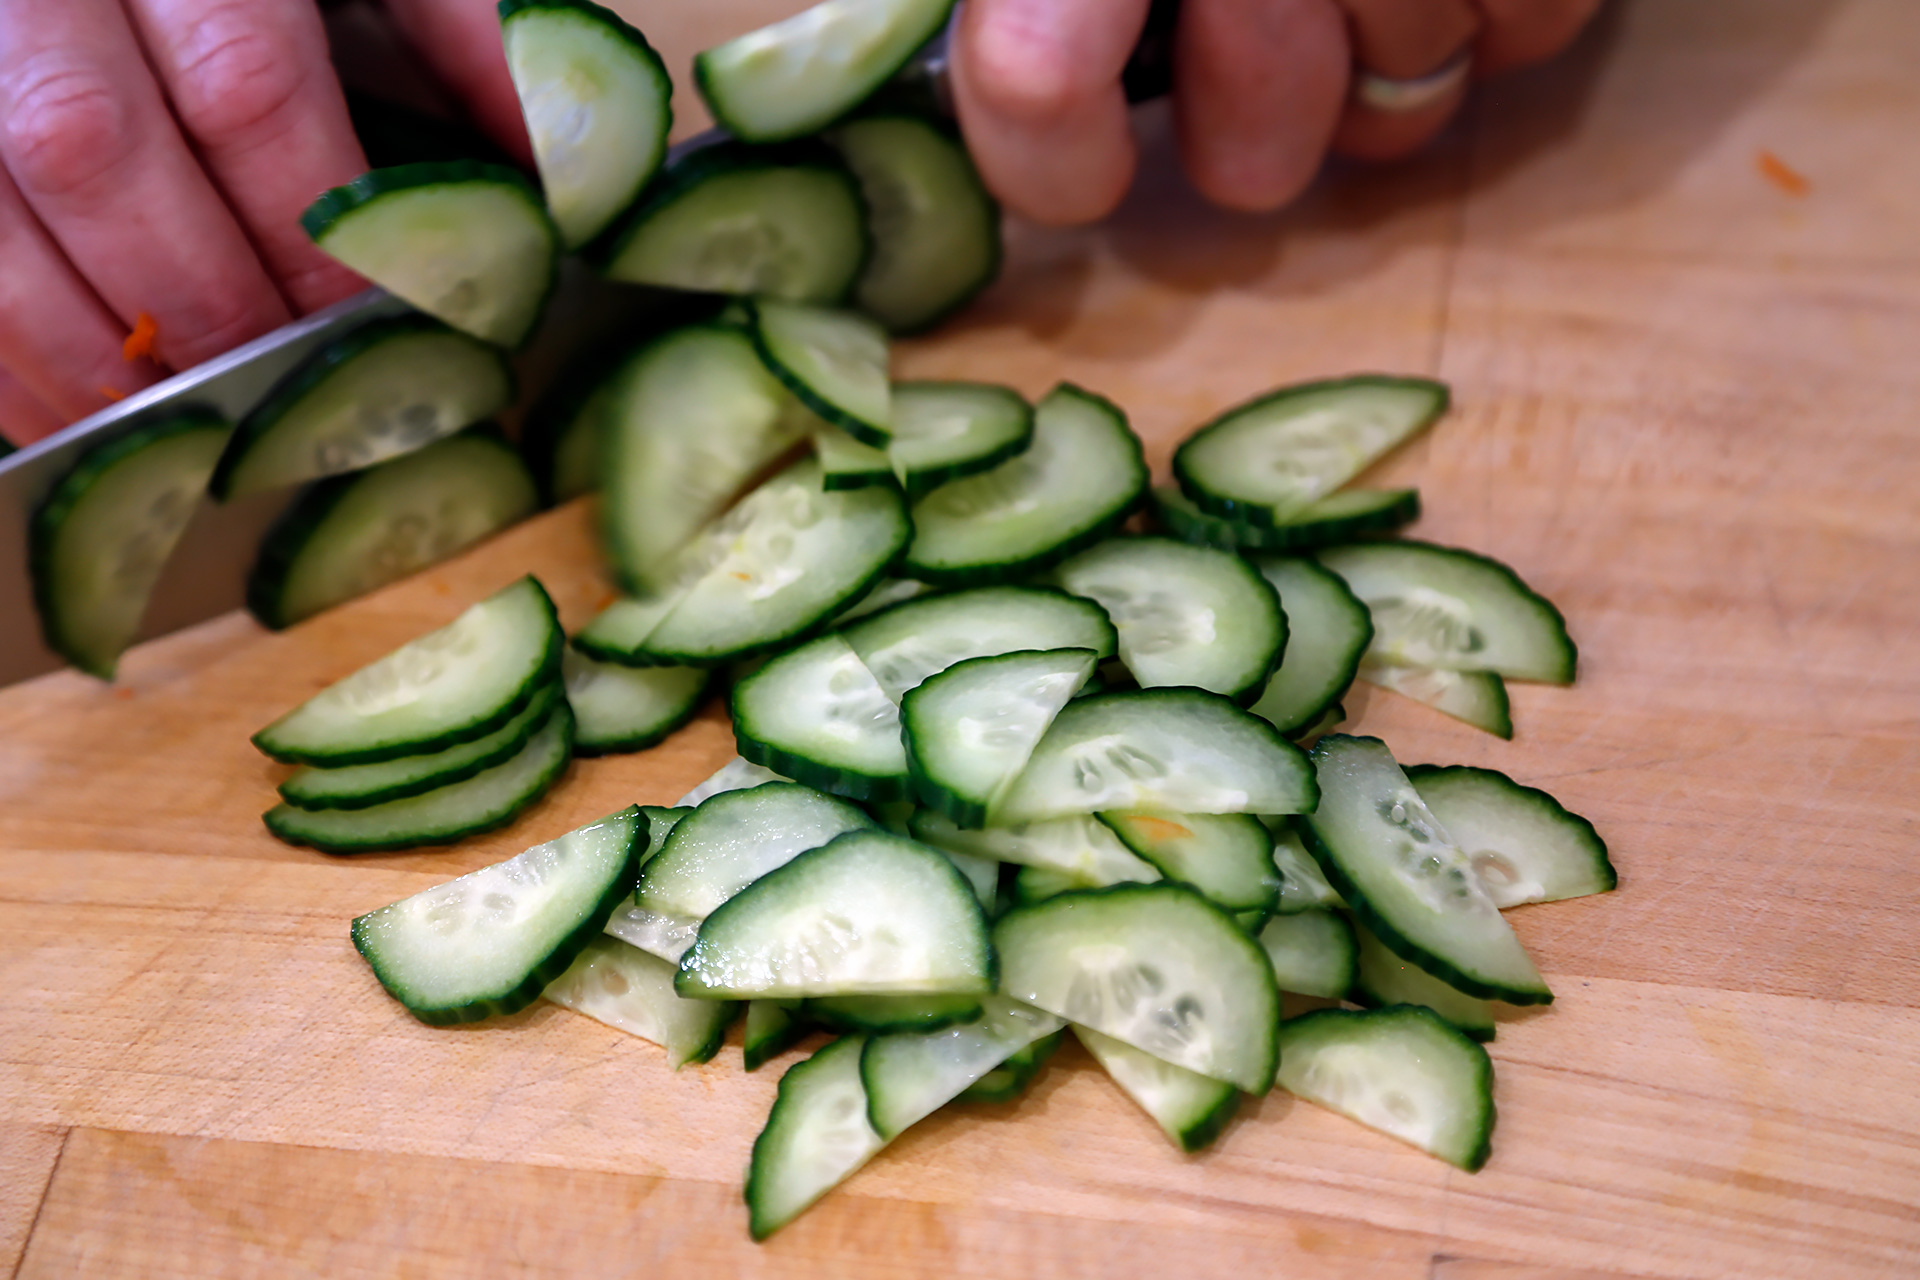 Cut the cucumber in half lengthwise then use a small metal spoon to scoop out the seeds. Thinly slice crosswise, then add to the bowl with the noodles.